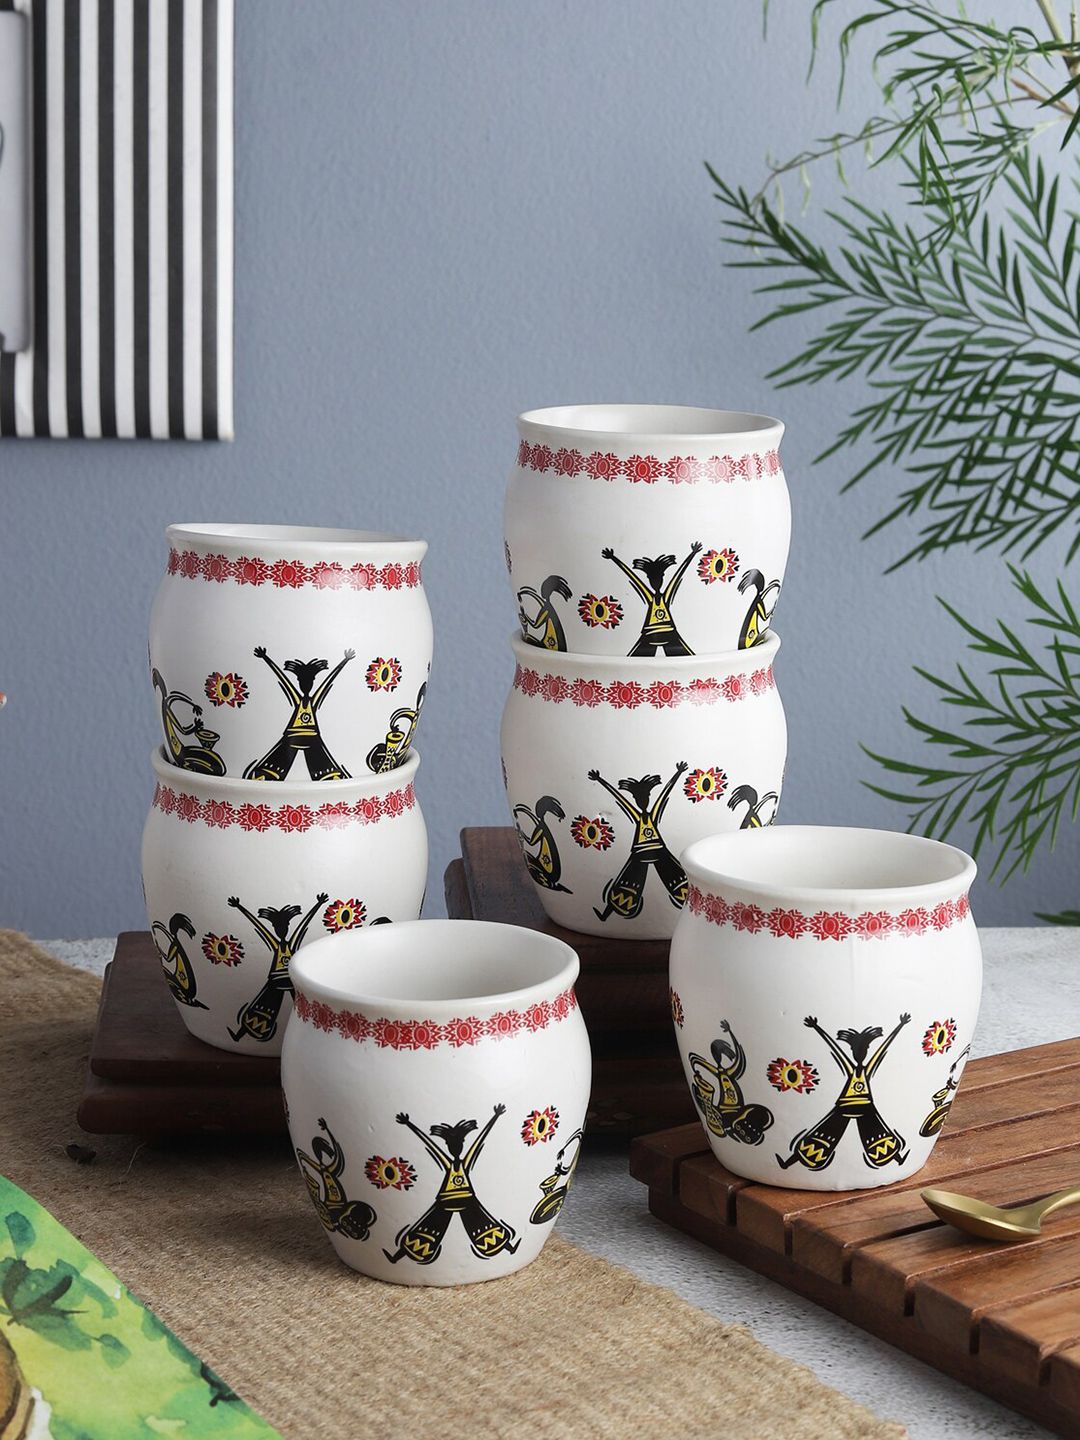 The Decor Mart Set Of 6 White & Red Printed Ceramic Glossy Kulladhs Price in India